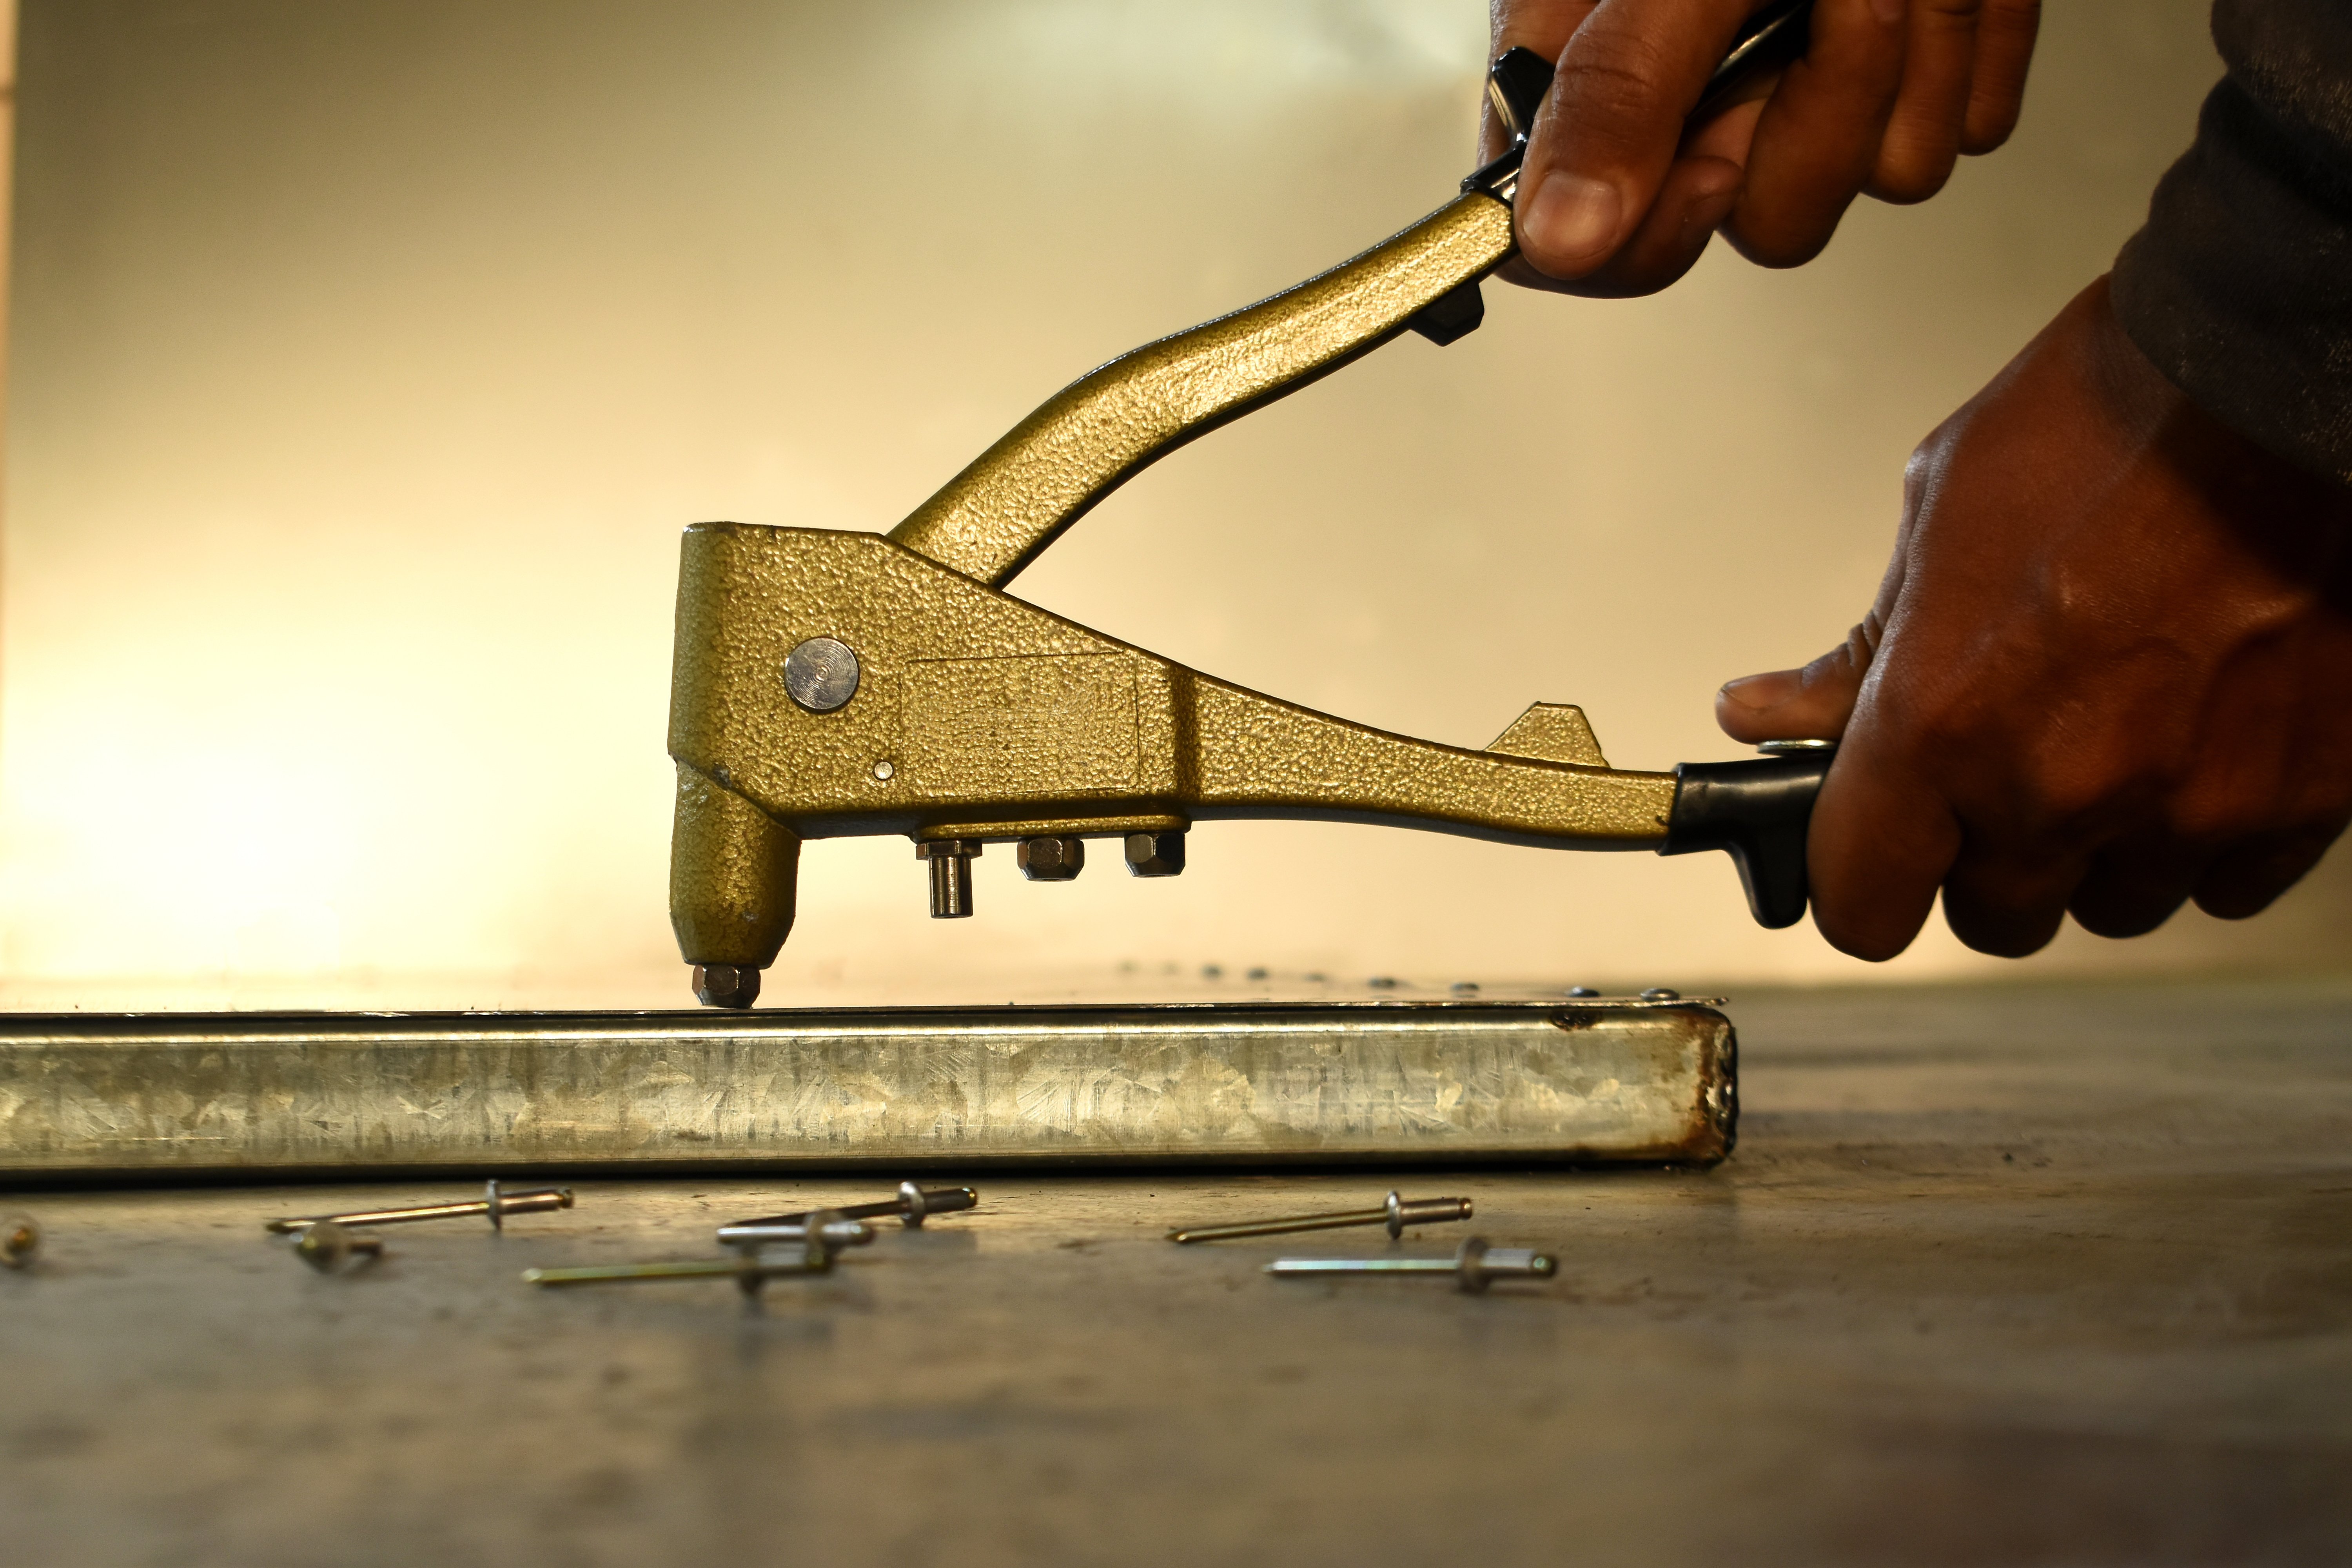 Hand rivet guns are sometimes used to install blind rivets. Source: Adobe/AfrandeePhotography